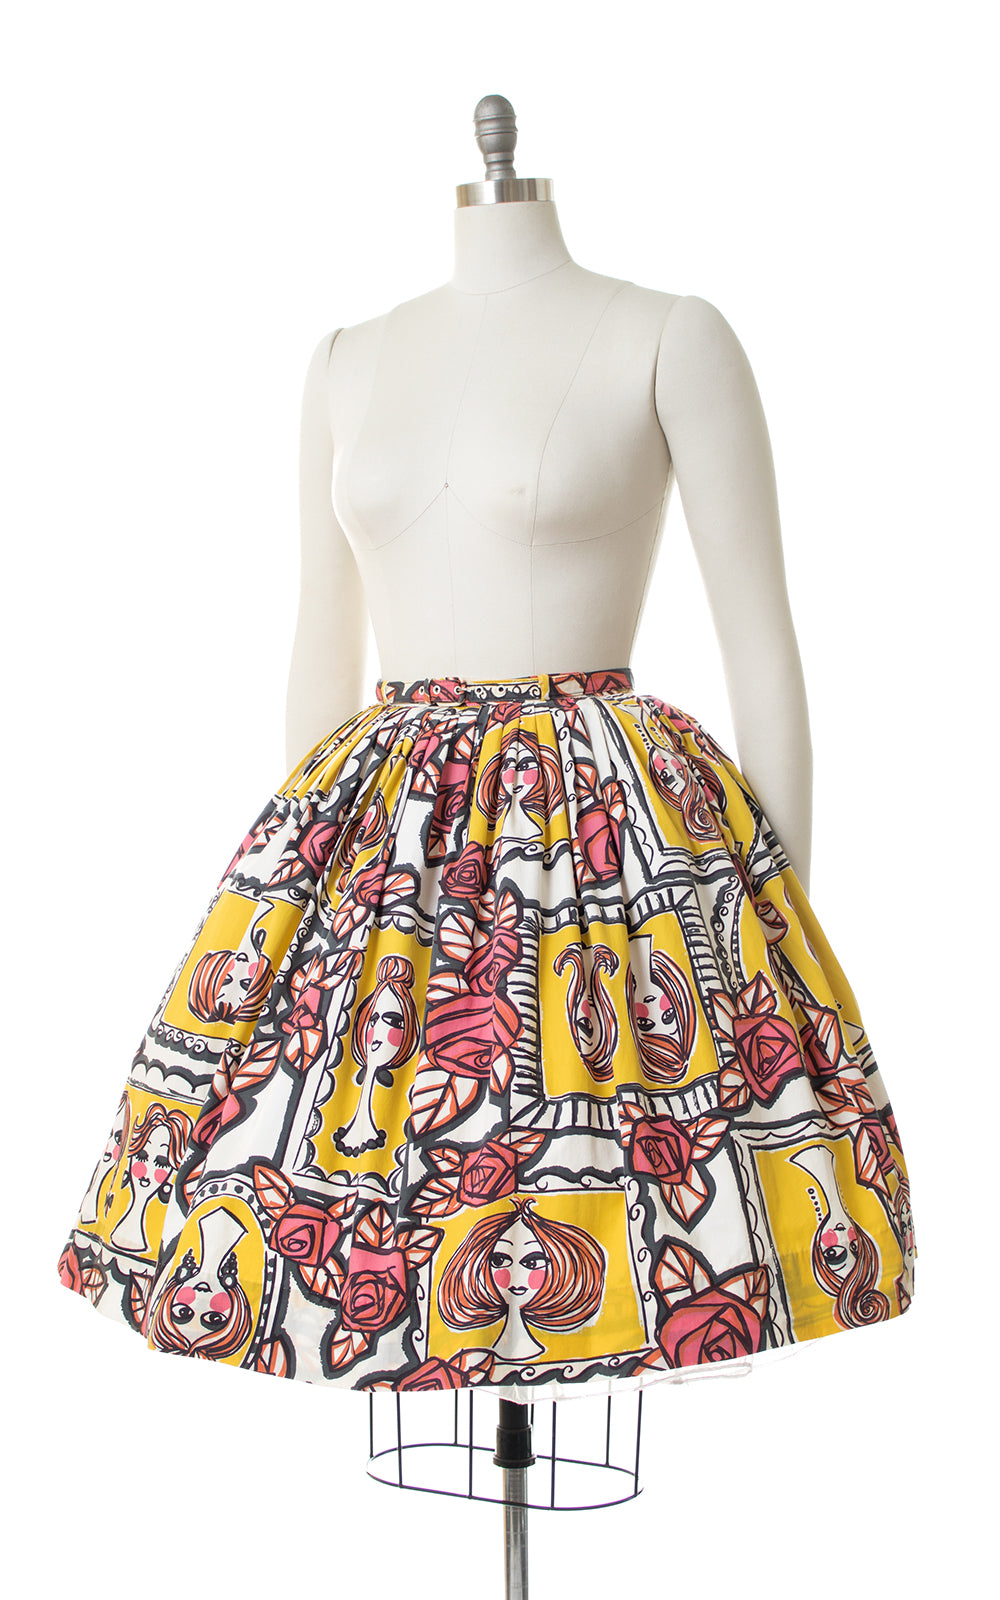 1960s Lady Faces & Roses Novelty Print Skirt